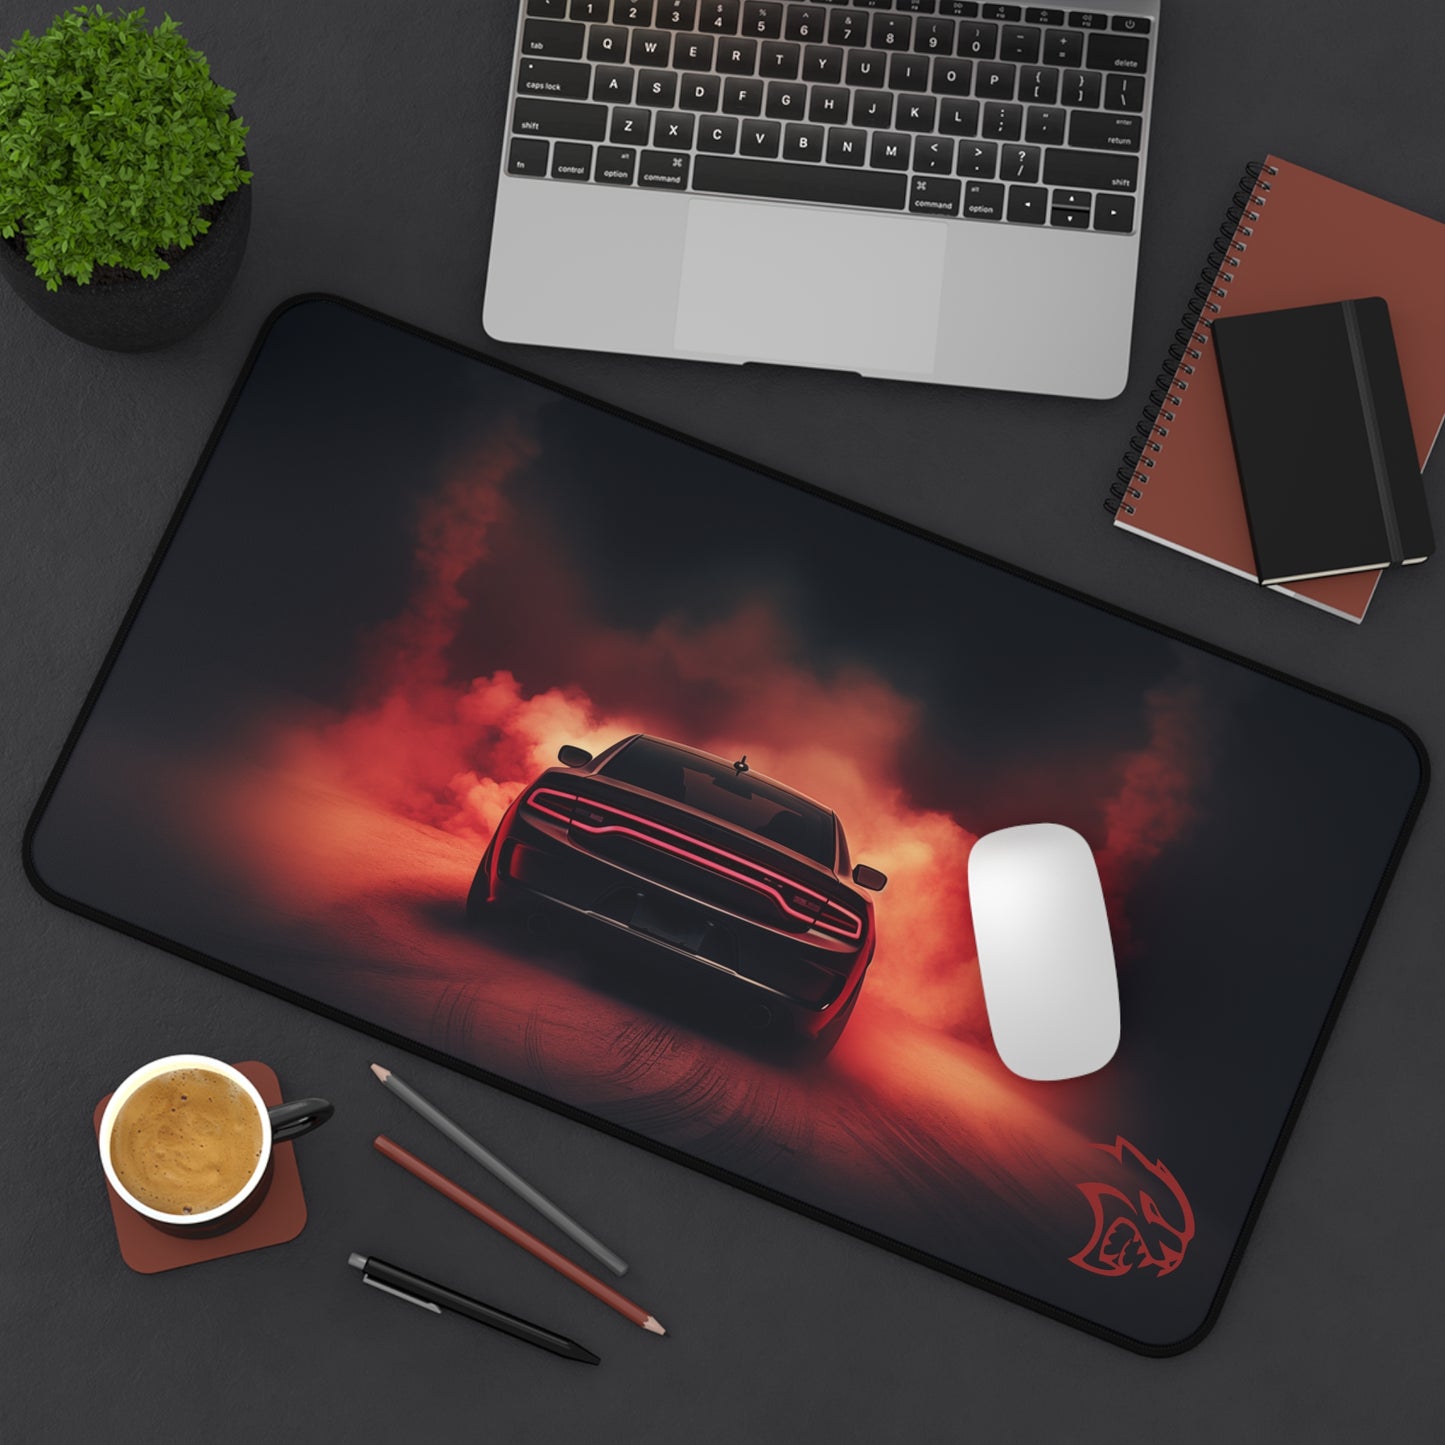 Dodge Charger Hellcat Up in Smoke Desk Mat